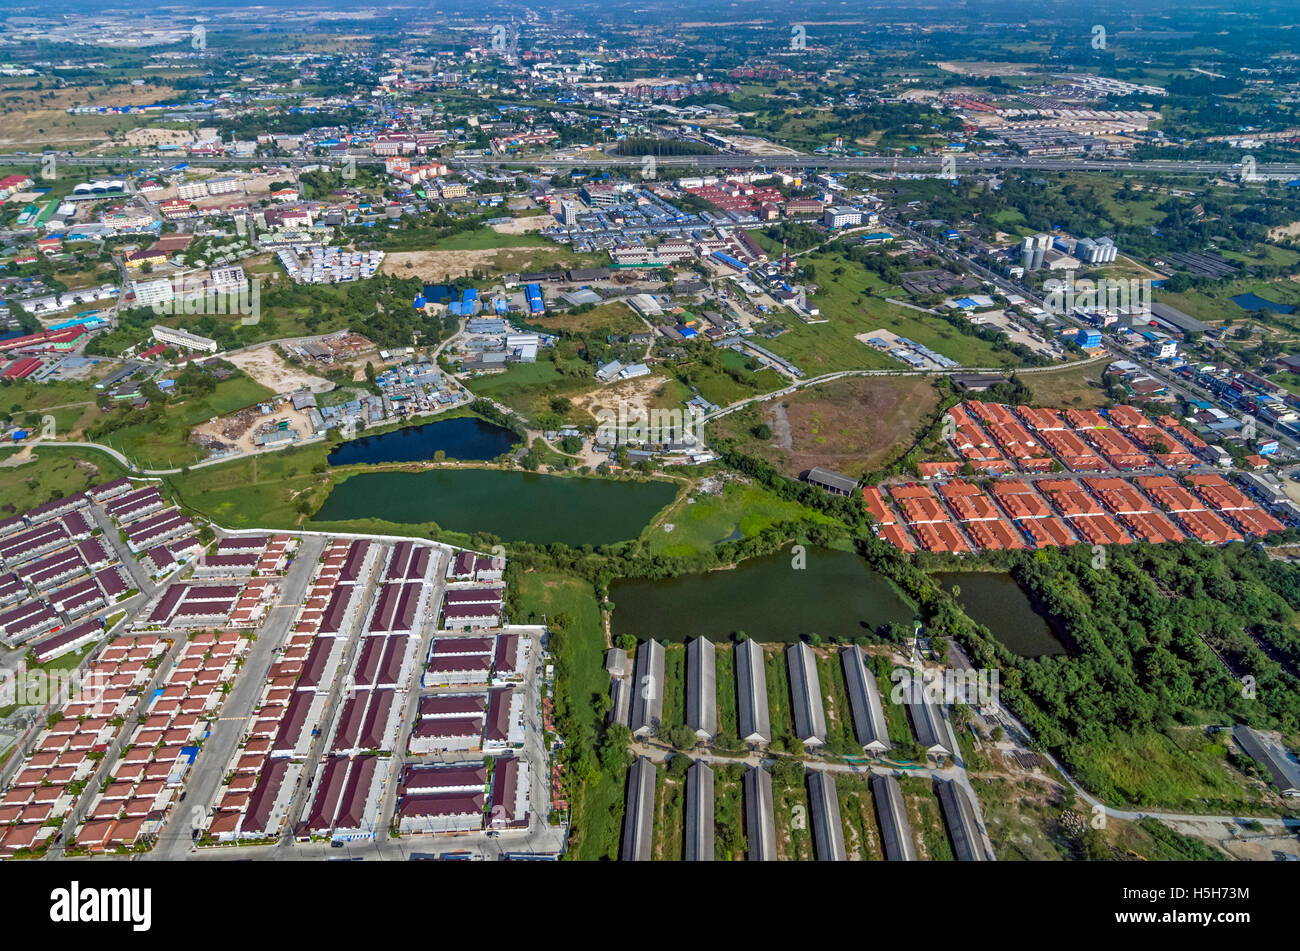 Industrial estate factories manufactures and residential housing projects aerial photography Stock Photo